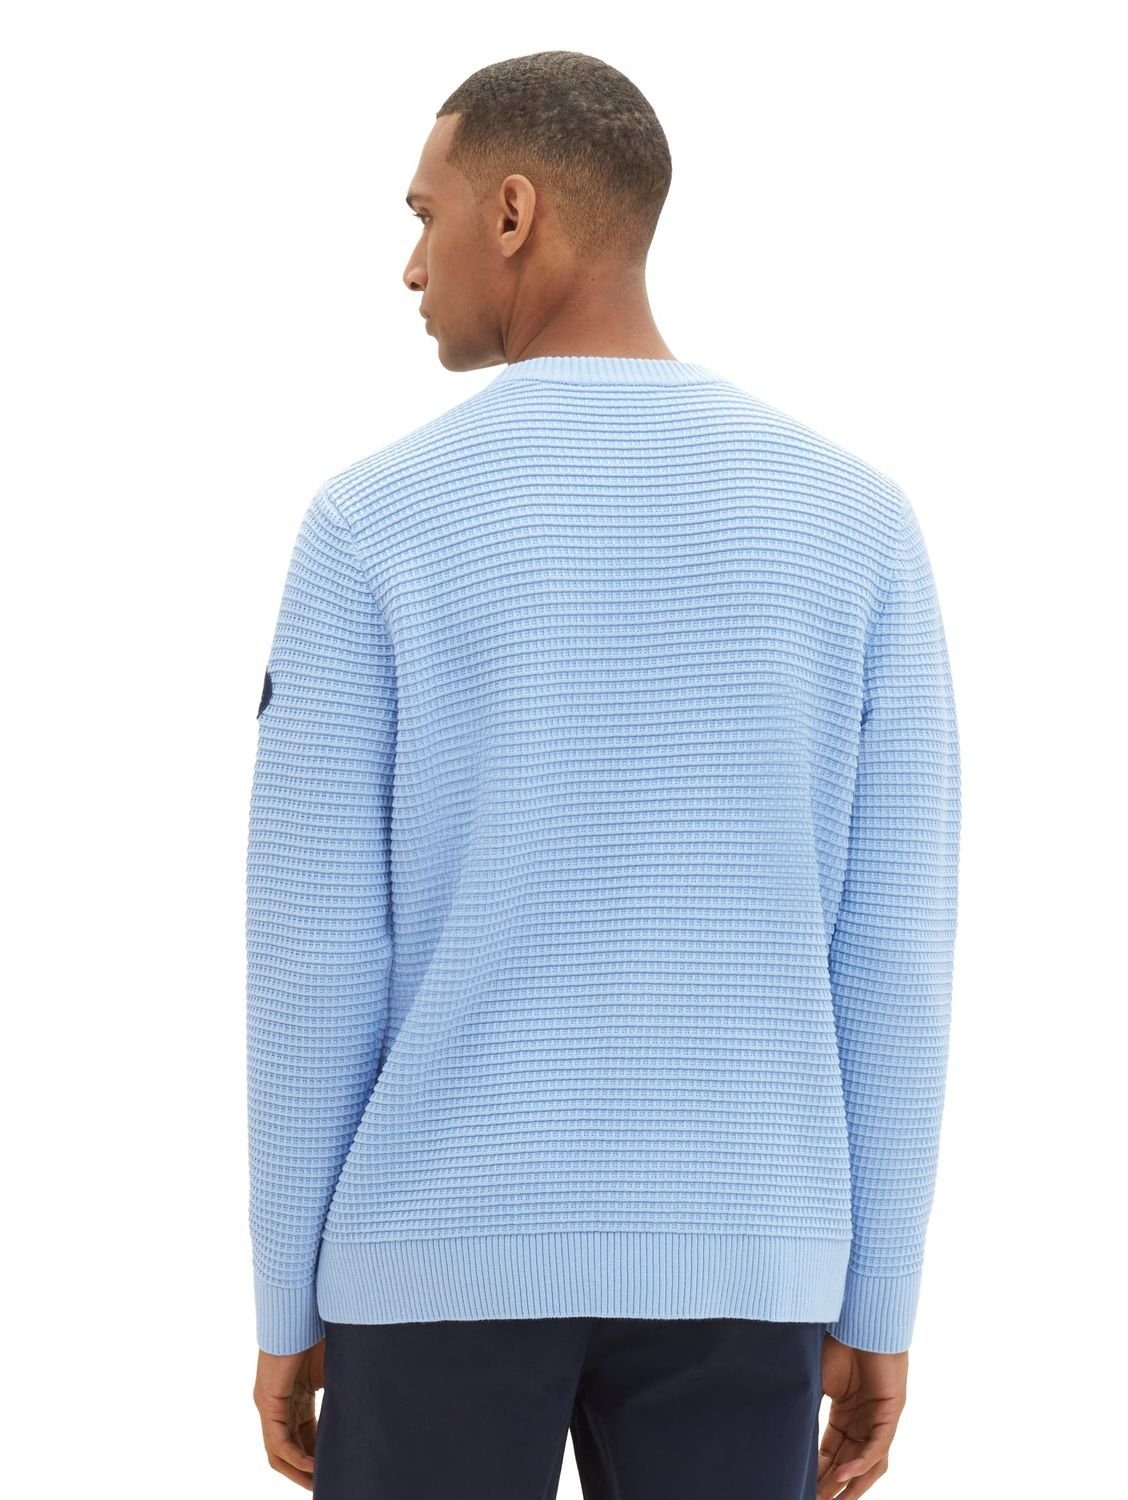 aus STRUCTURED CREWNECK TAILOR Middle Baumwolle TOM Out Strickpullover KNIT 32245 Blue Washed